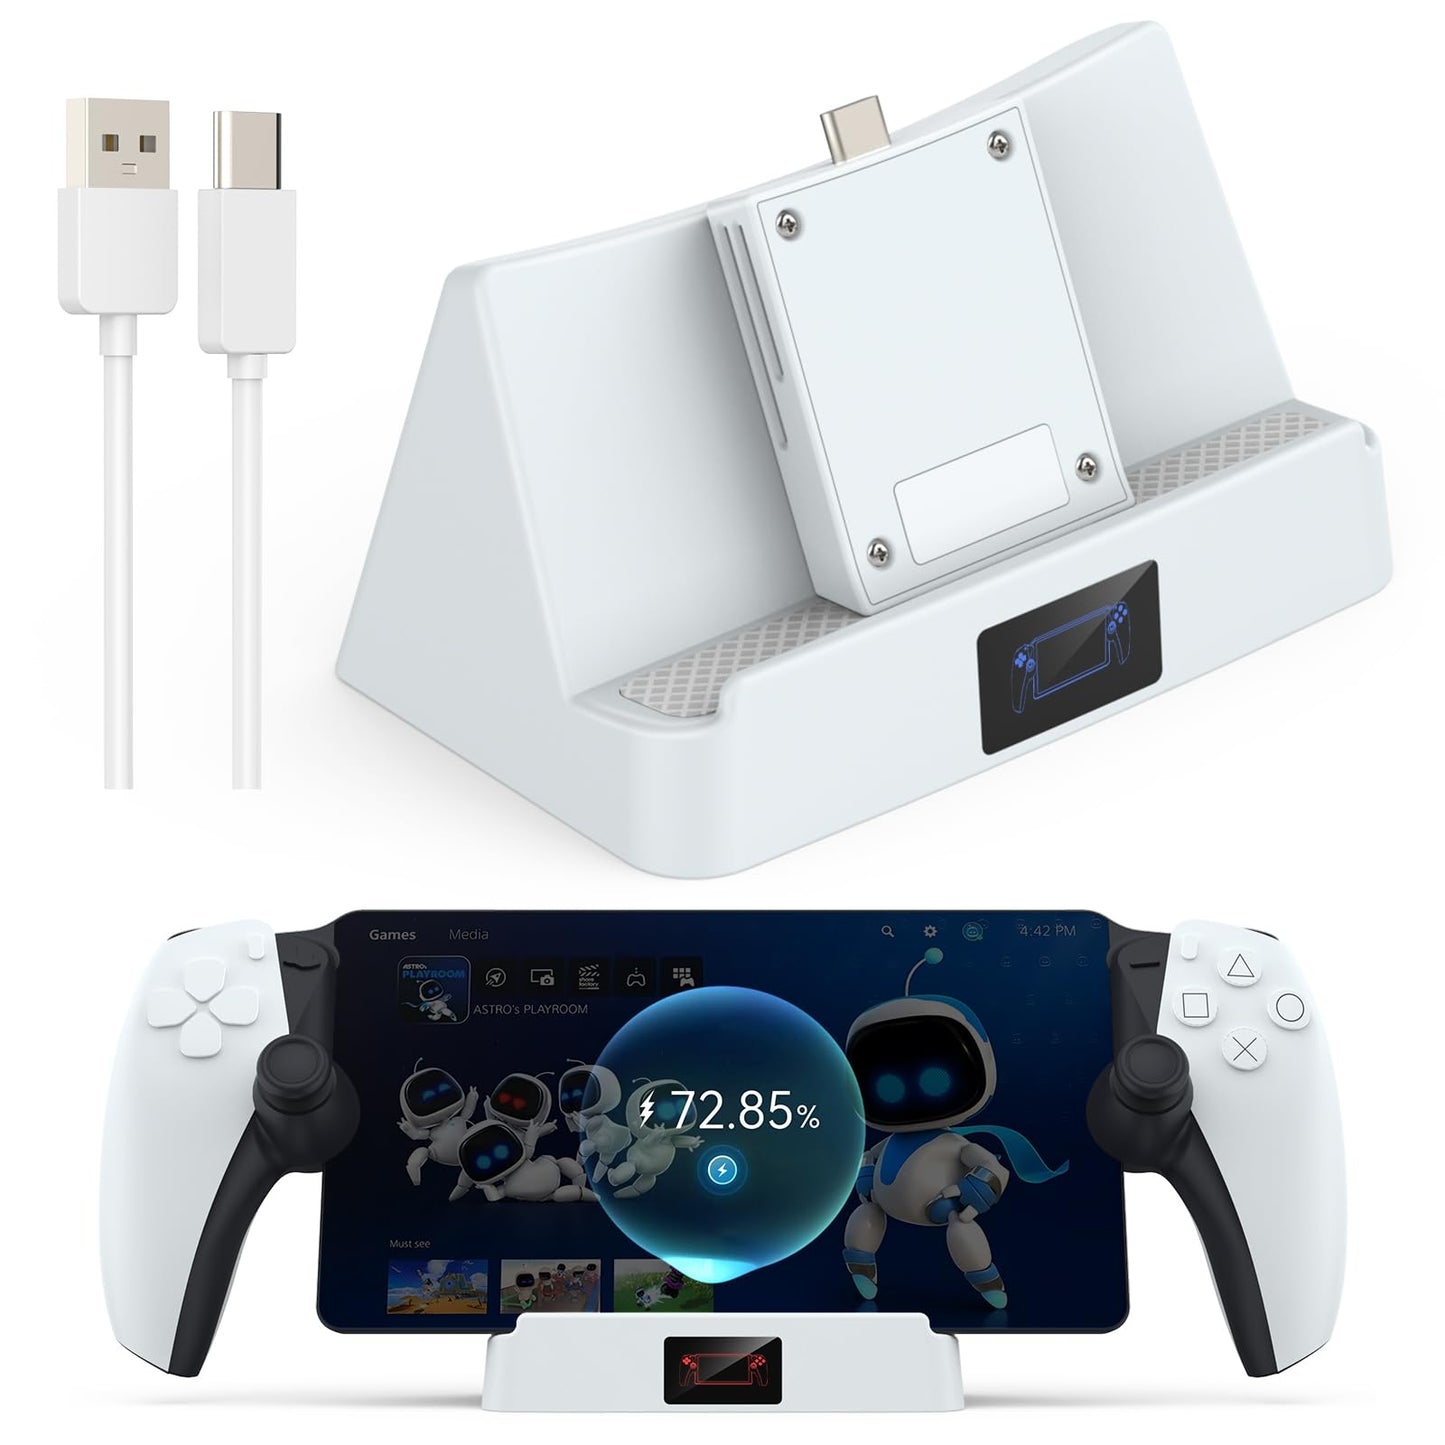 Nepagz Charging Stand for Playstation Remote Player - Playstation 5, Portable Wireless Charge Dock with Indicator Light and USB-C Cable for Playstation Portal Accessories, White - amzGamess